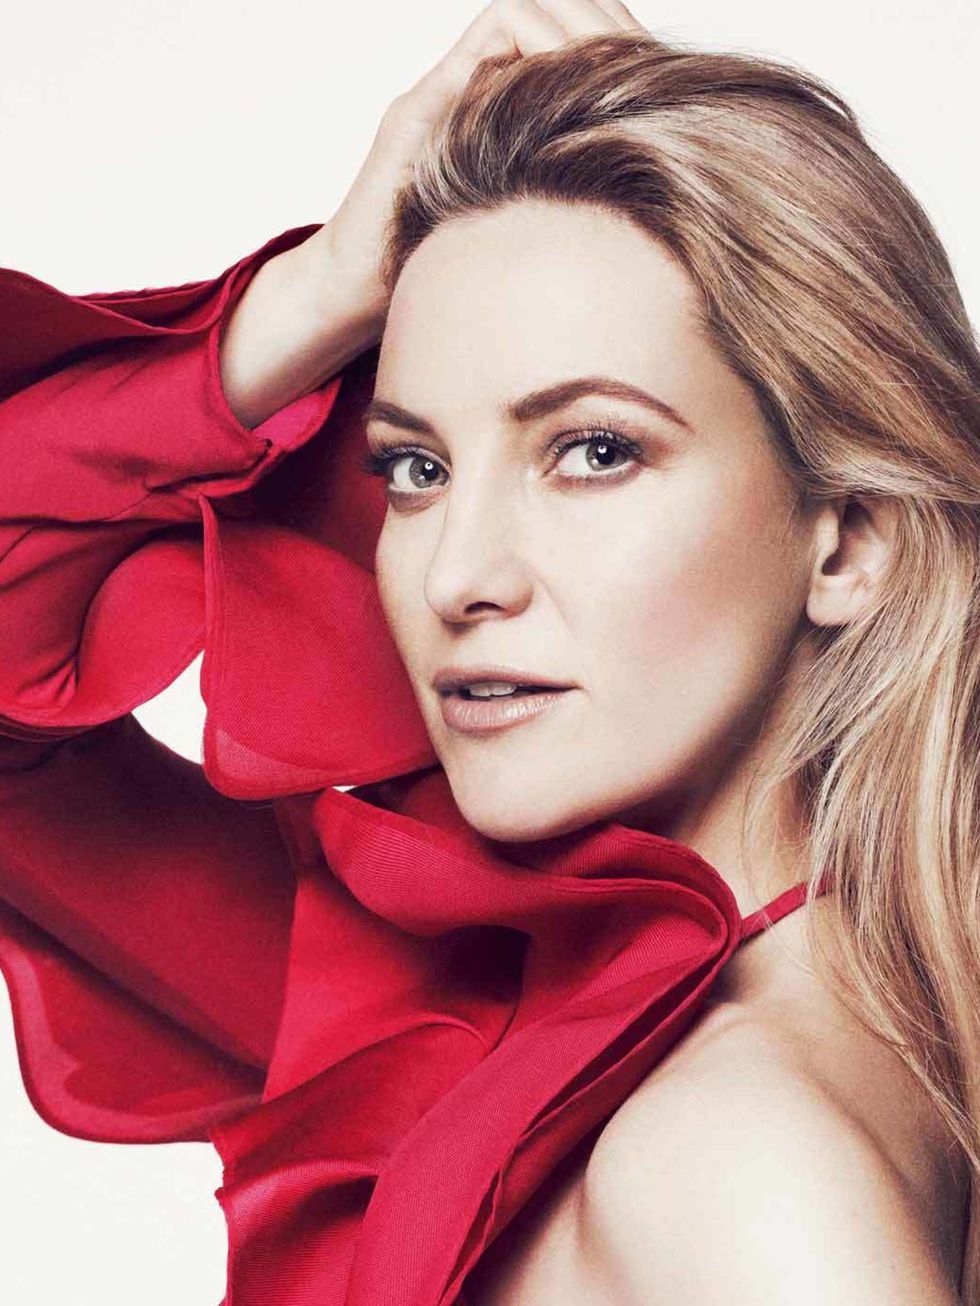 <p>Hollywood royalty and adopted Brit, <a href="http://www.elleuk.com/star-style/celebrity-style-files/kate-hudson">Kate Hudson, </a>graces the cover of our May issue sporting an effortlessly striking beauty look. Mixing the Undone Grunge hair trend see